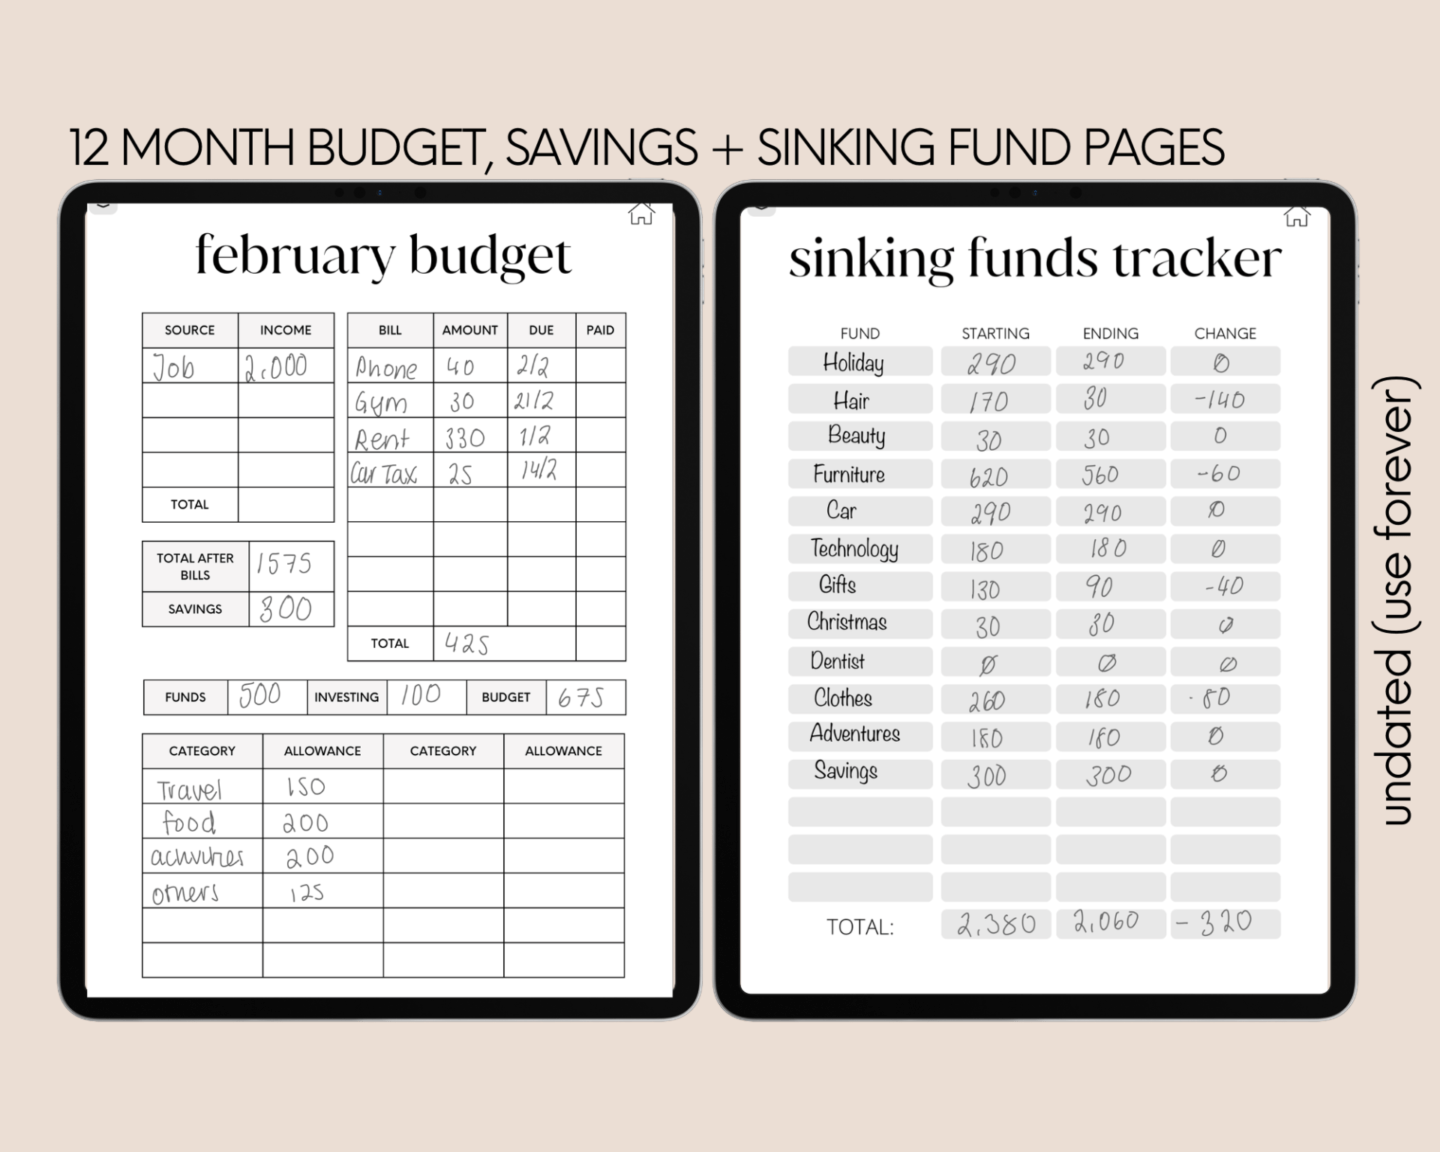 what is a sinking funds tracker